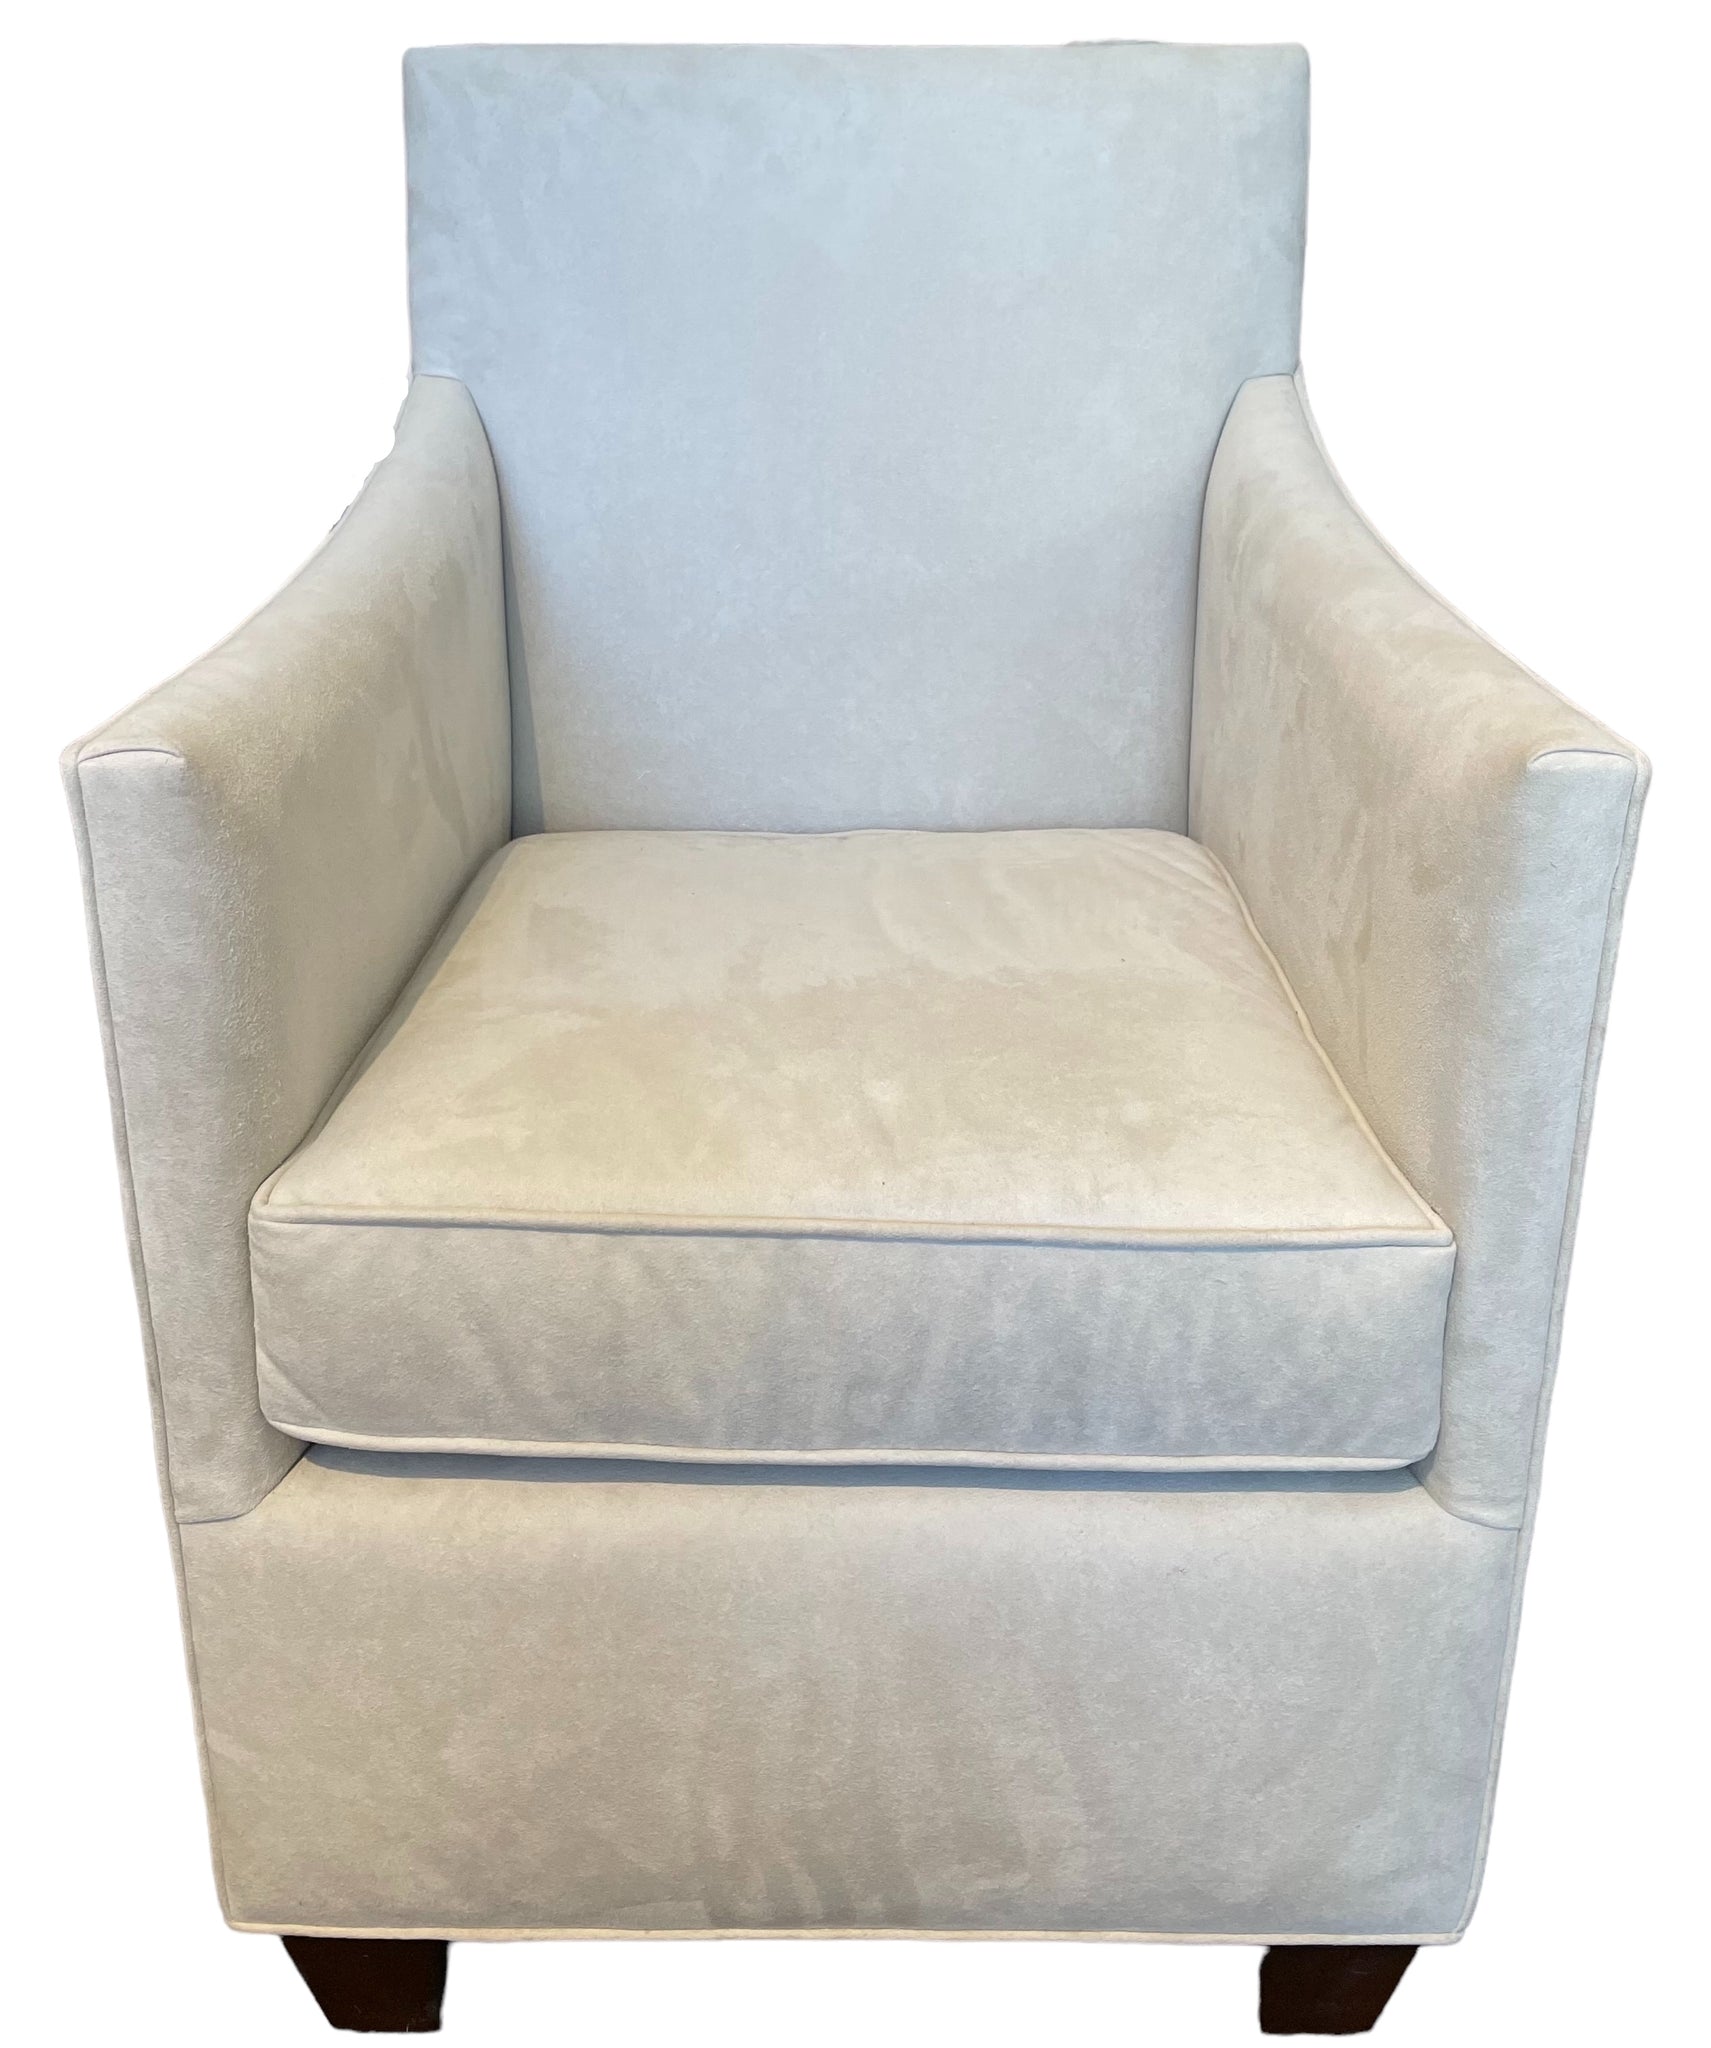 One of Two Newly Upholstered Ultra Suede Chairs with Small  Lumbar Pillows